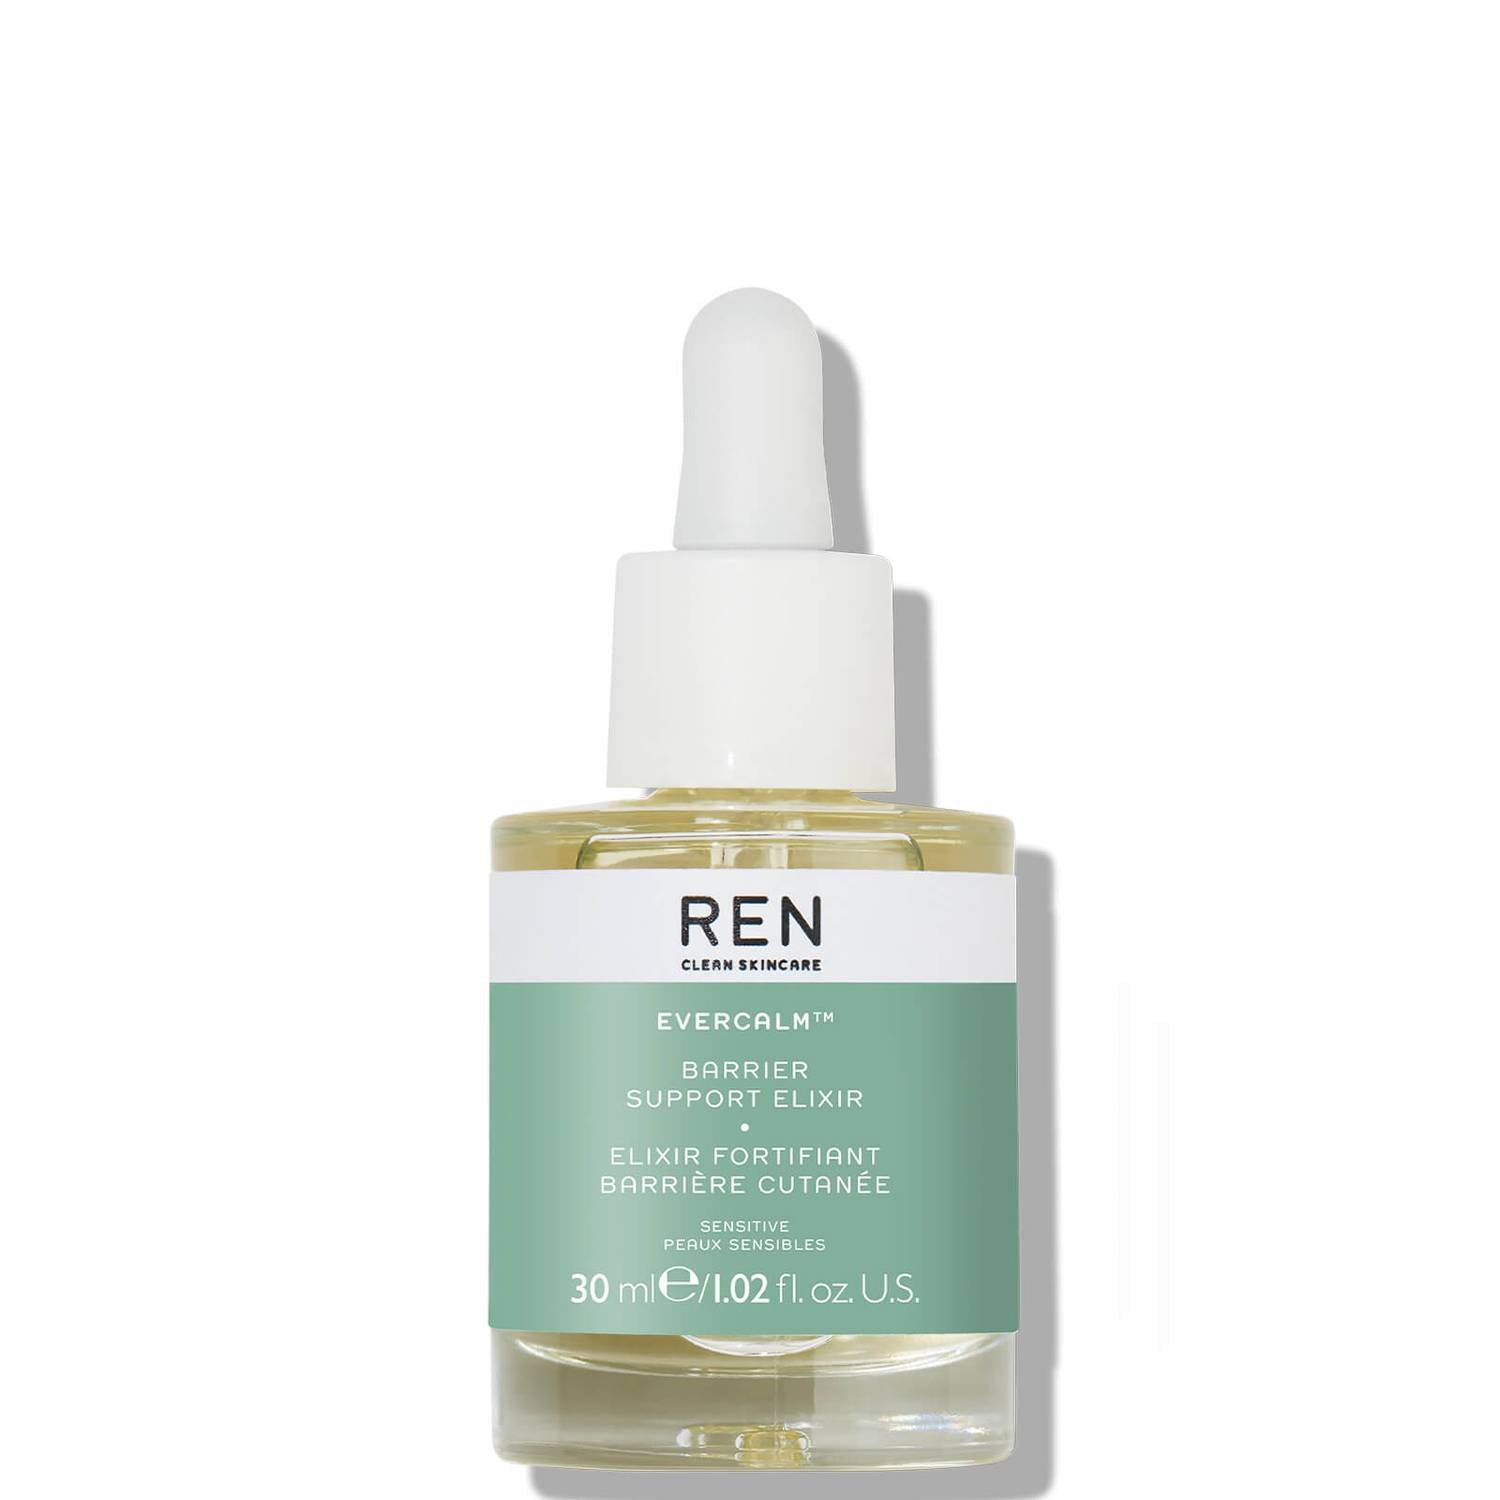 REN Evercalm Barrier Support Elixir is developed to fight dryness and signs of sensitisation or inflammation, the comforting, microbiome-friendly, scent-free concoction contains 100% naturally-sourced ingredients to quickly make skin feel suppler, calmer and hydrated.